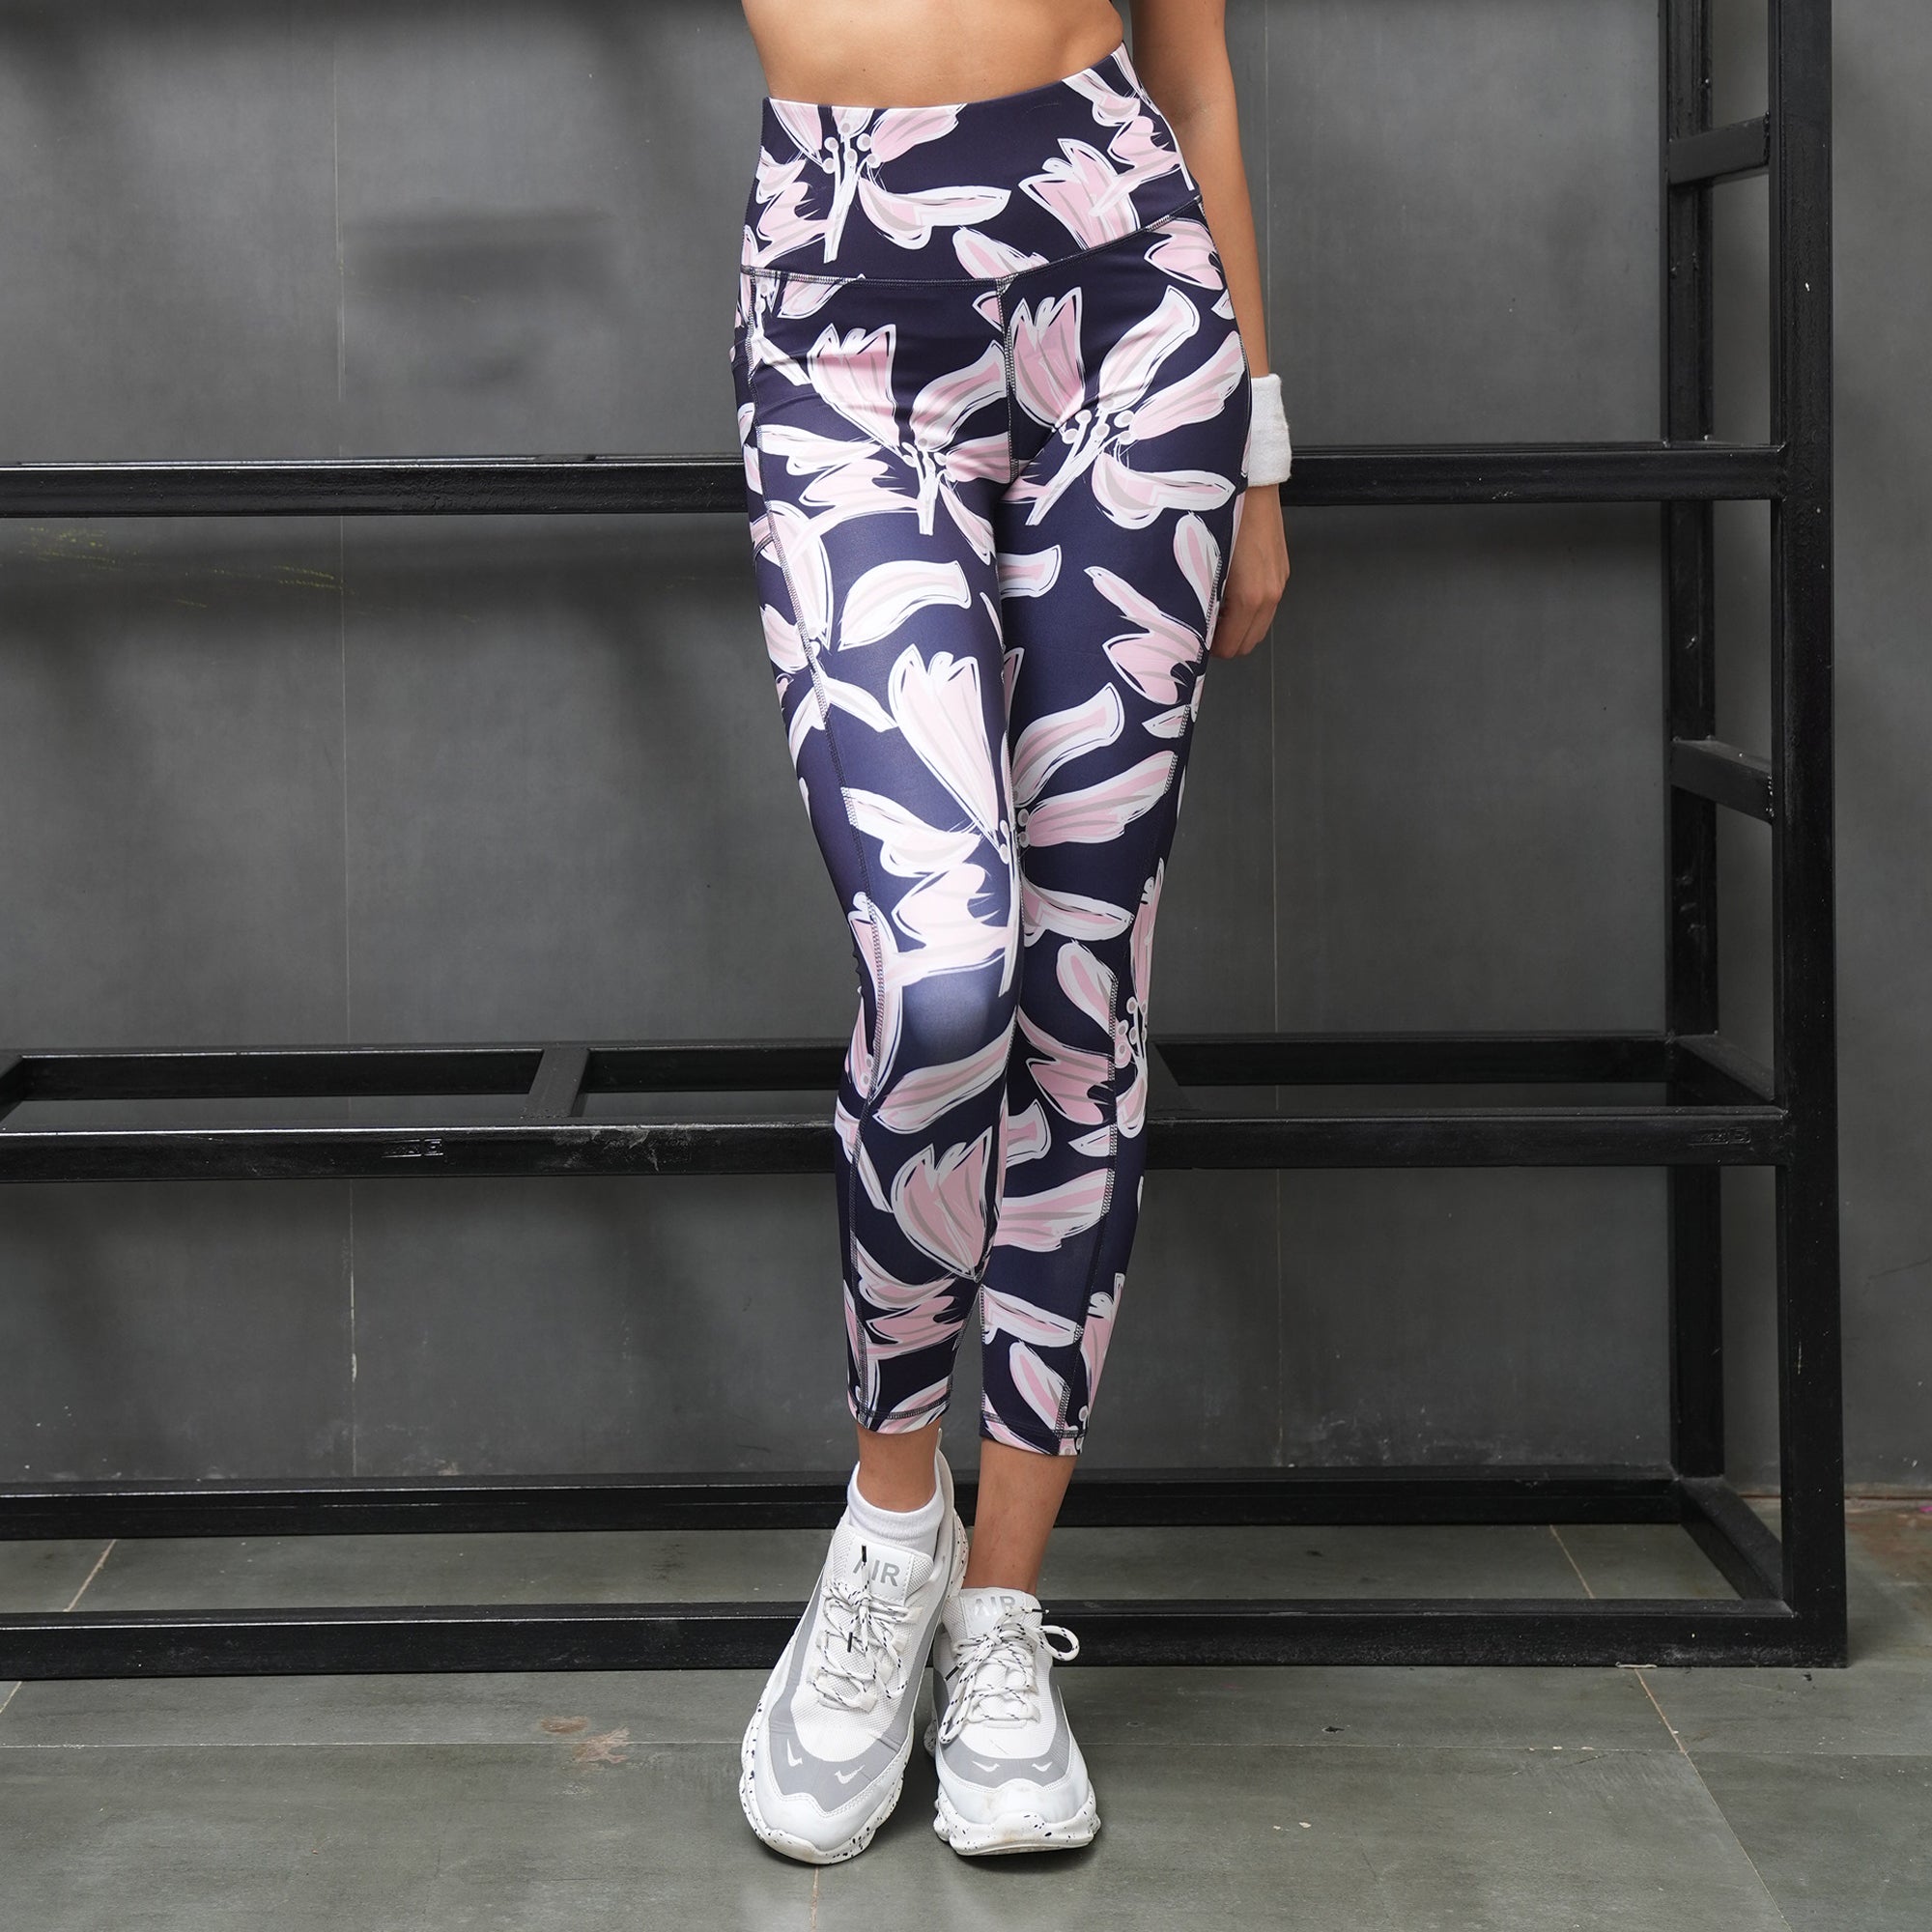 High Waist Ankle Length Sports Leggings With Pockets-AT-4